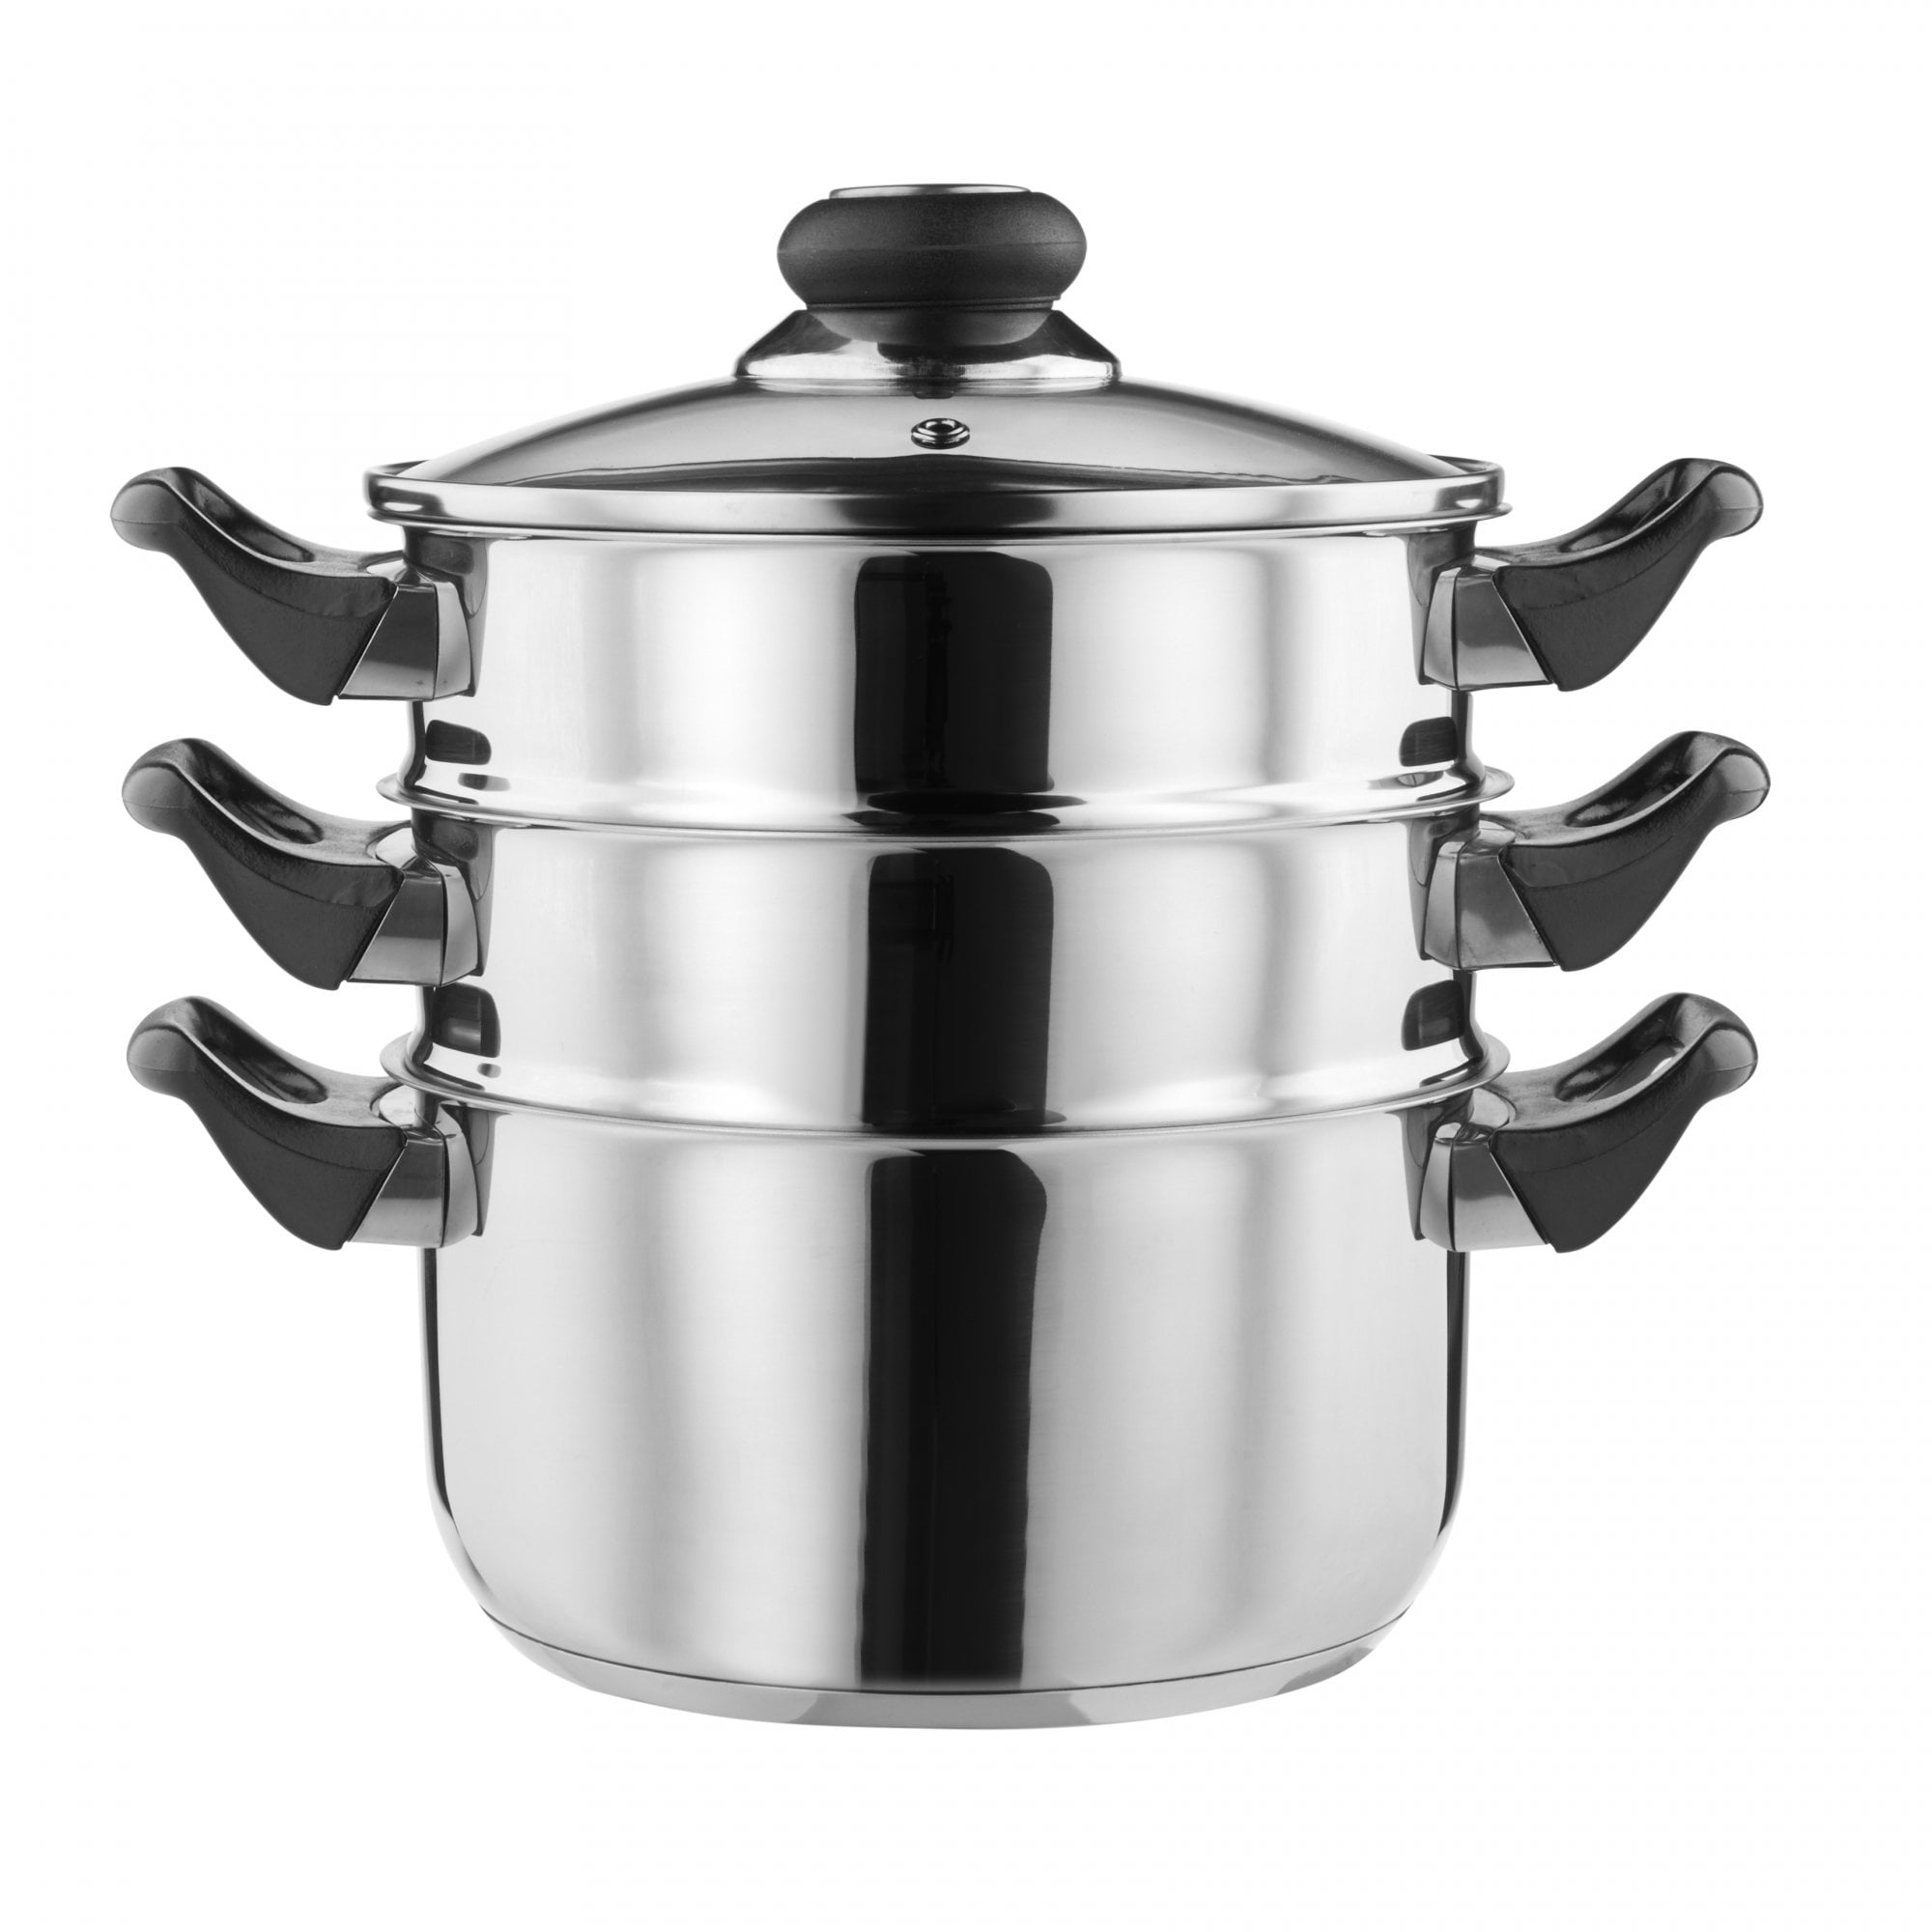 Lewis’s Stainless Steel 3 Tier Steamer Pan with Glass Lid - Silver  | TJ Hughes